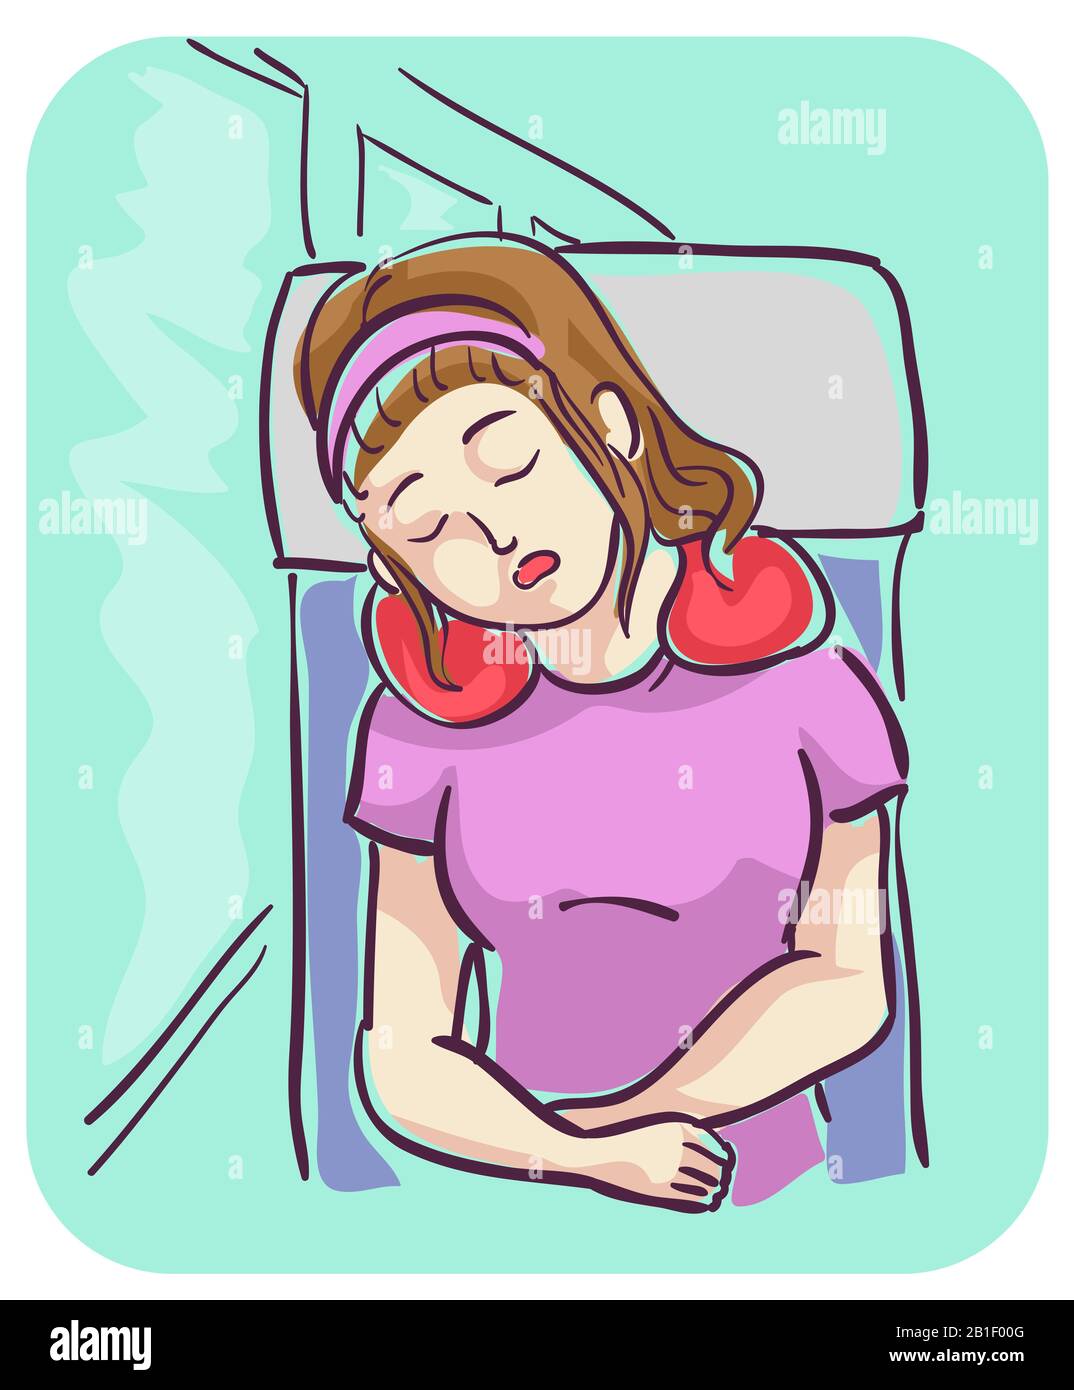 Illustration of a Girl Sleeping While Sitting In a Bus By the Window and Wearing Neck Pillow Stock Photo